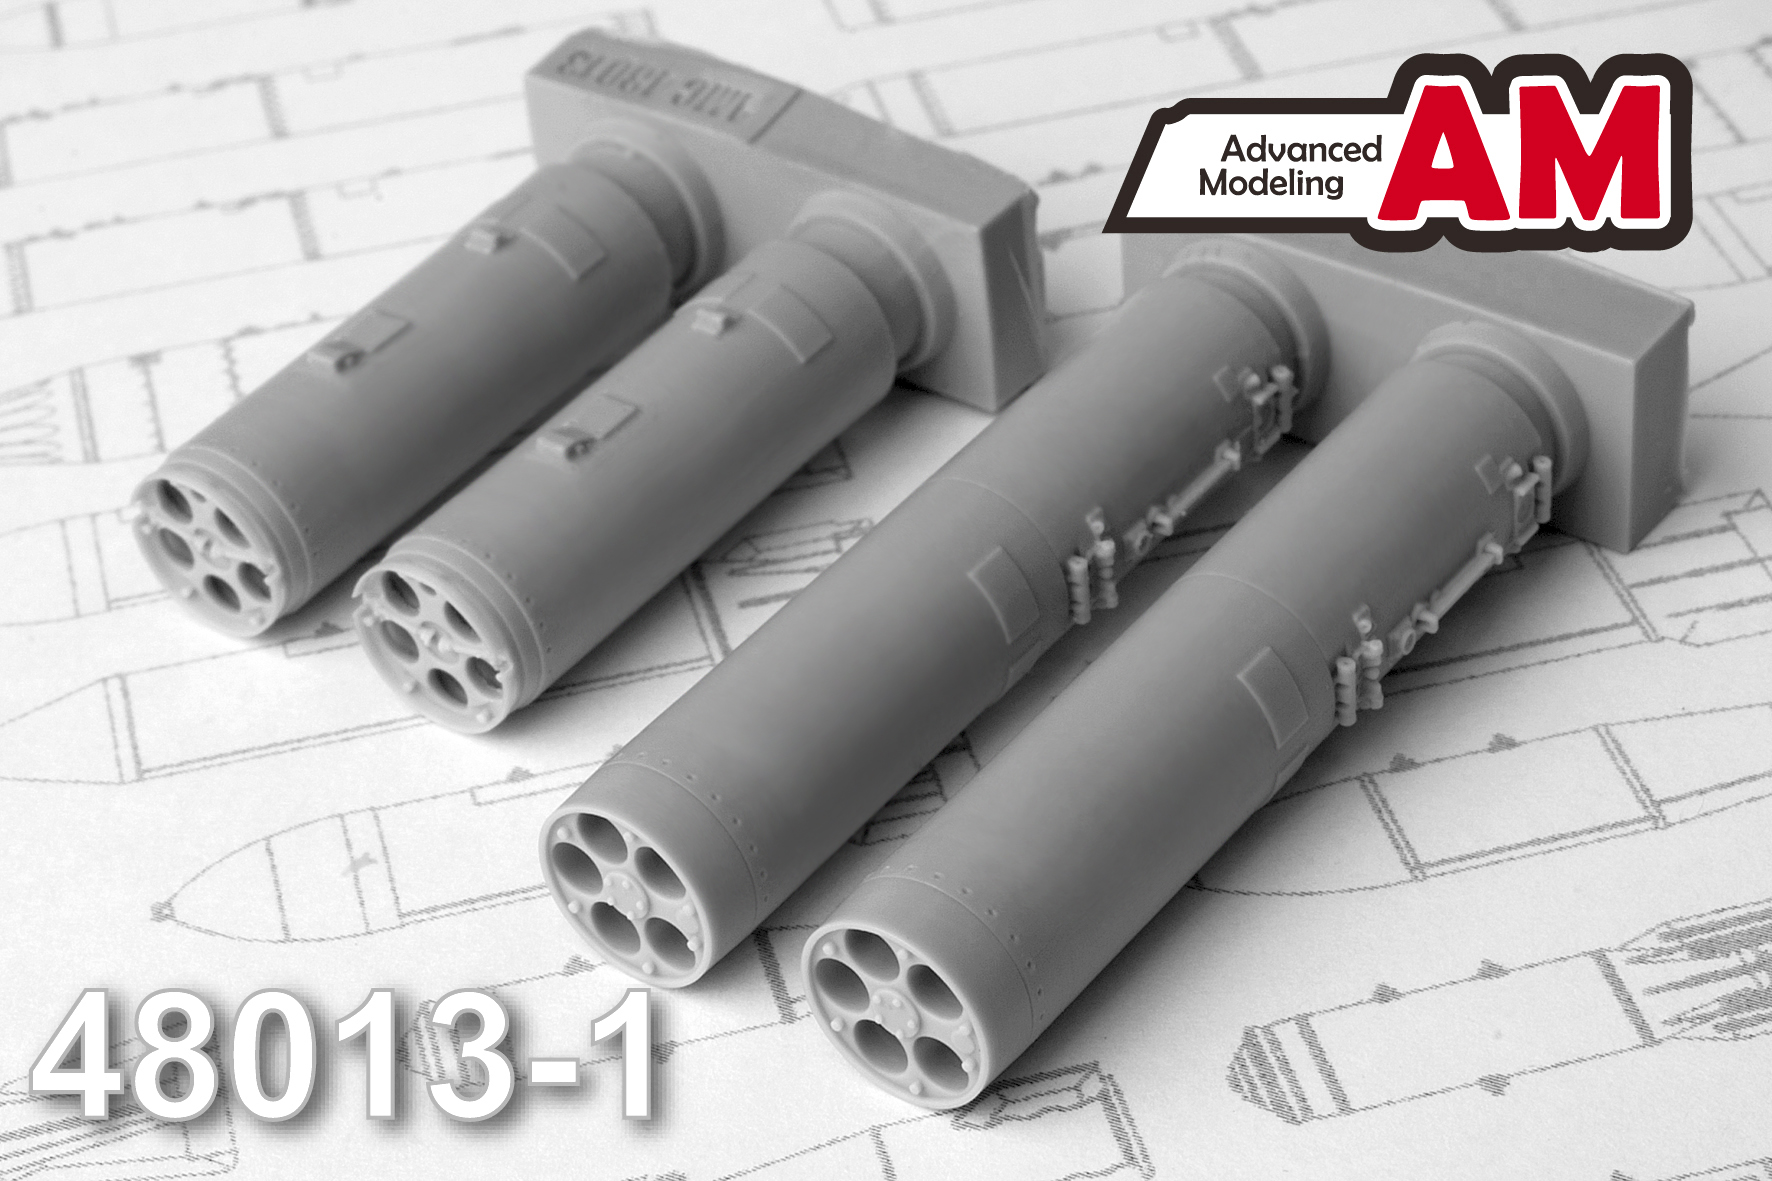 Additions (3D resin printing) 1/48 B13L1 Block of unguided aviation missiles (Advanced Modeling) 